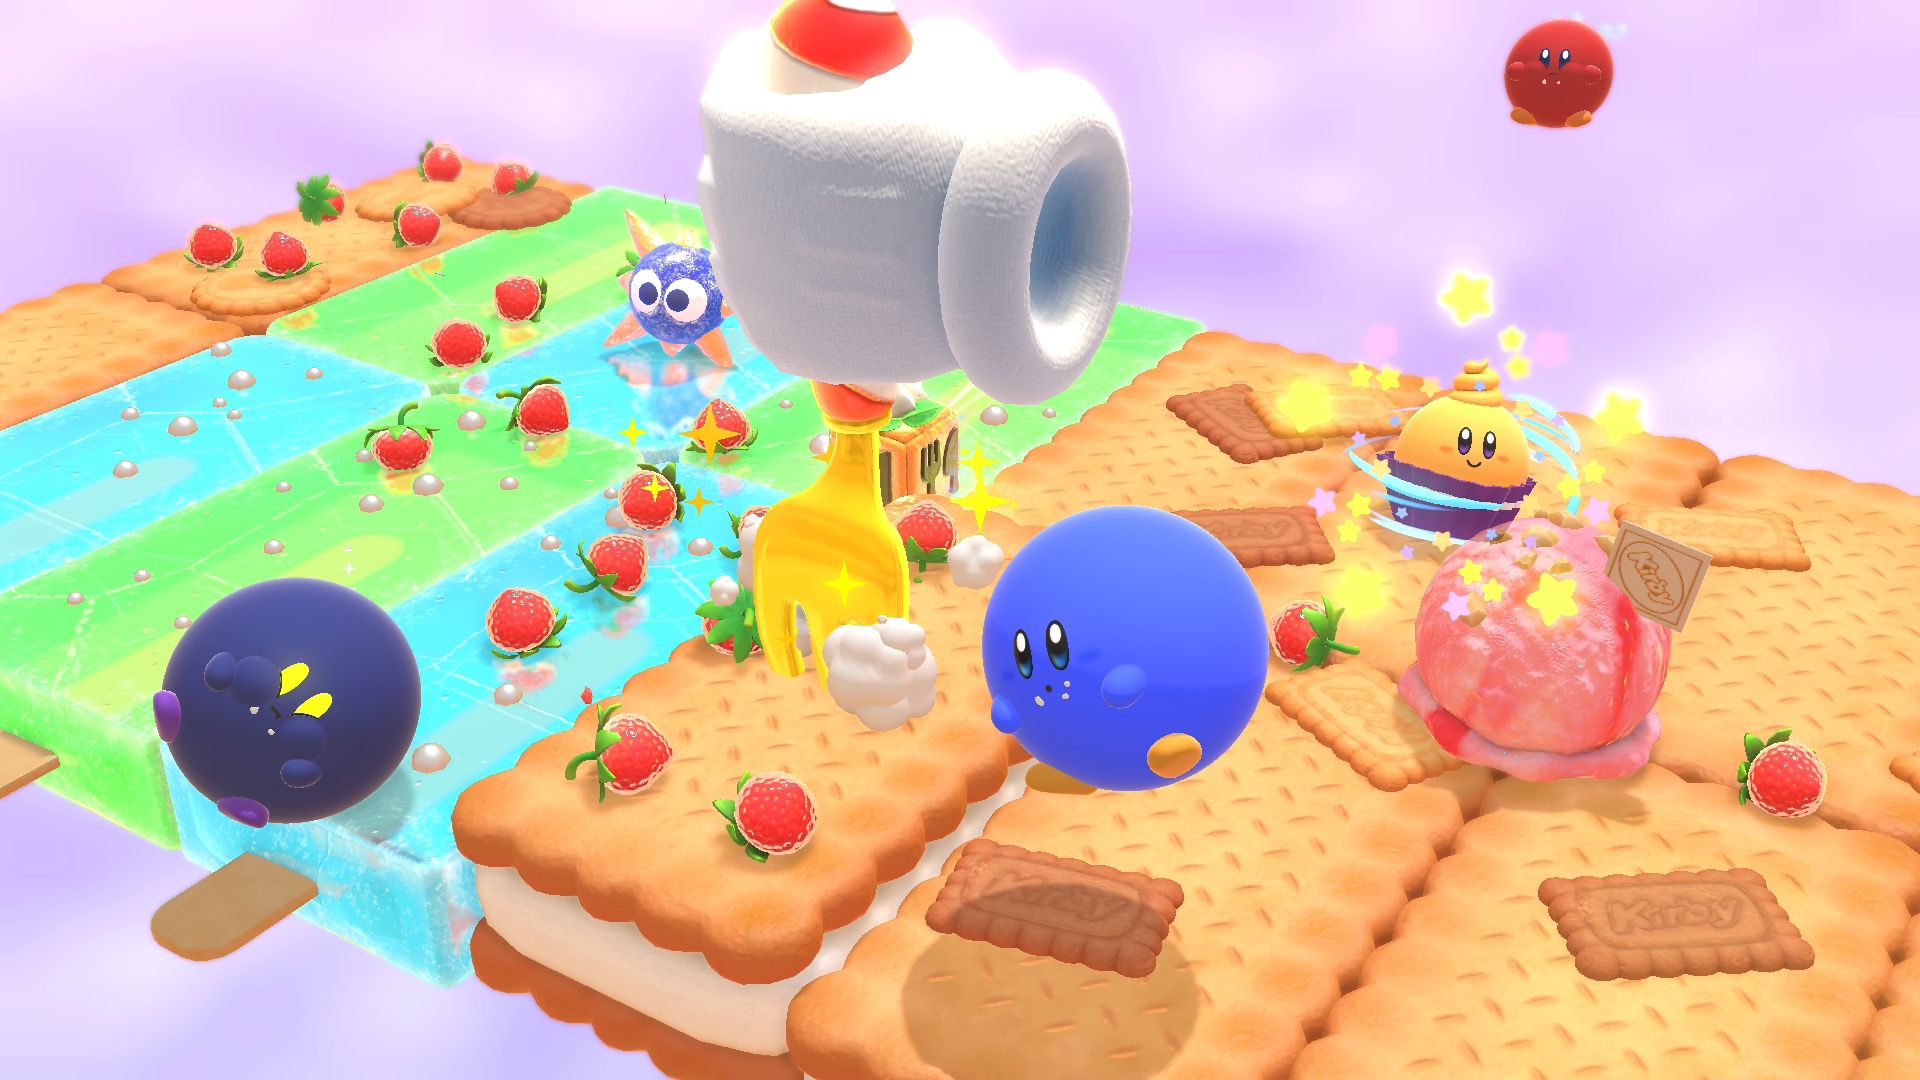 Kirby's Dream Buffet: Everything you need to know